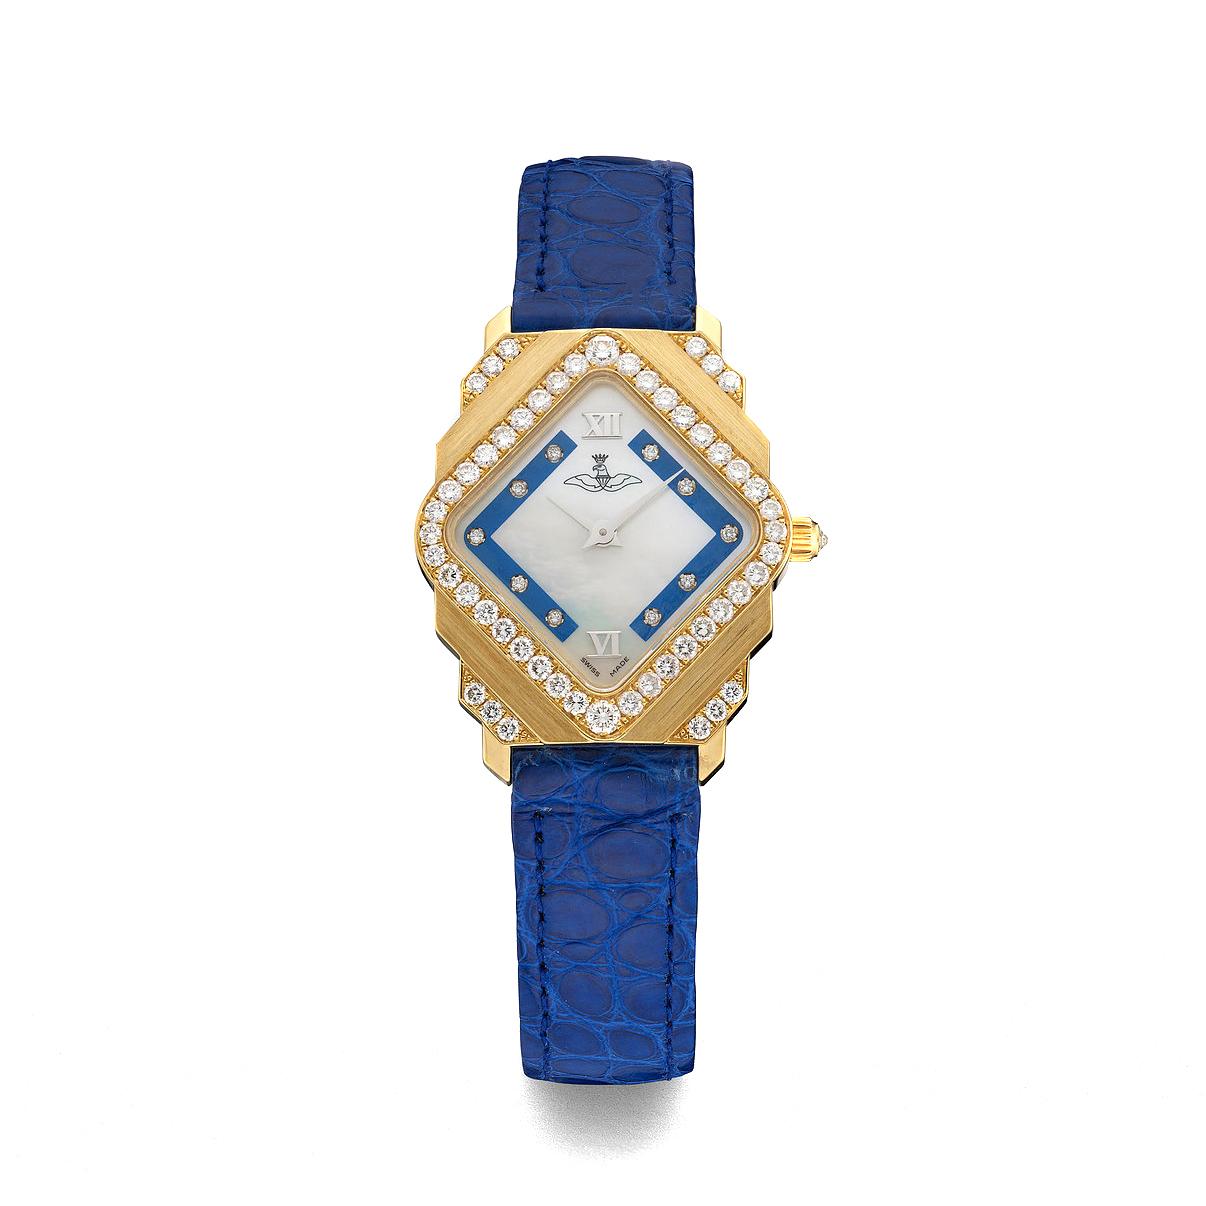 Watch in 18kt yellow gold white mother of pearl blue zone setwith 10 diamonds 0.05 cts bezel and attache set with 52 diamonds1.43 cts prong buckle alligator strap quartz movement.